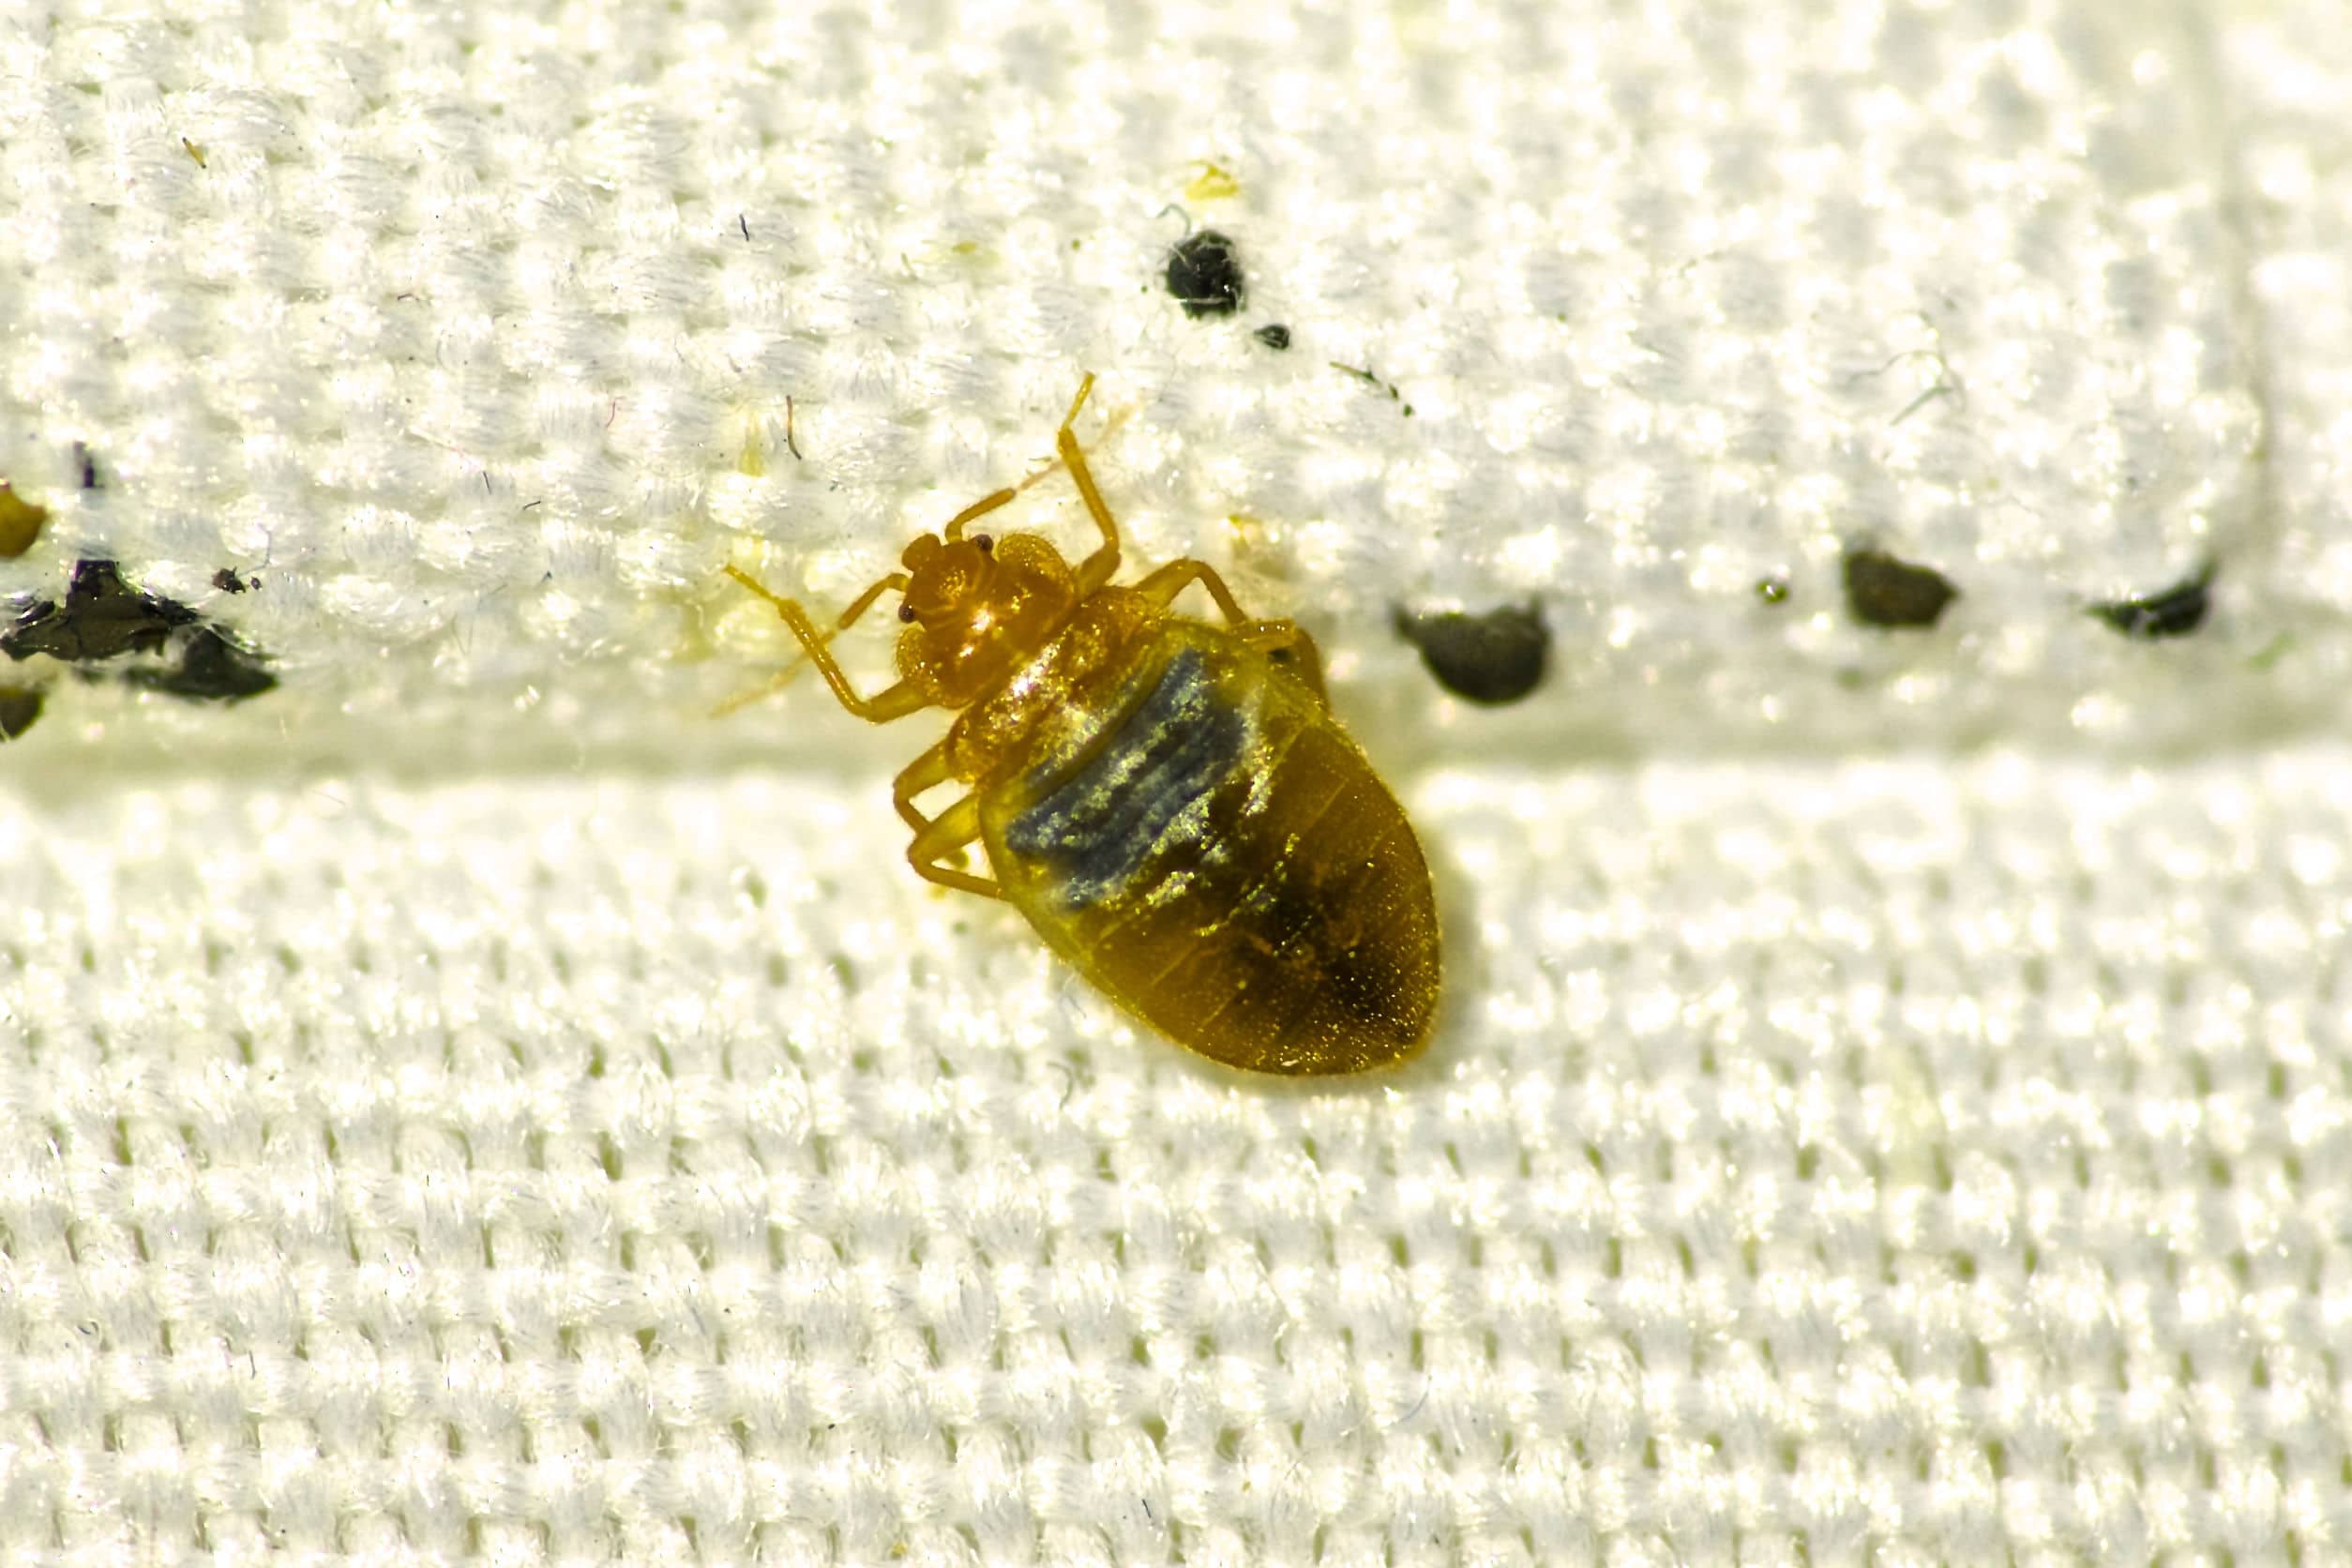 Toronto Bed Bug Removal and Control